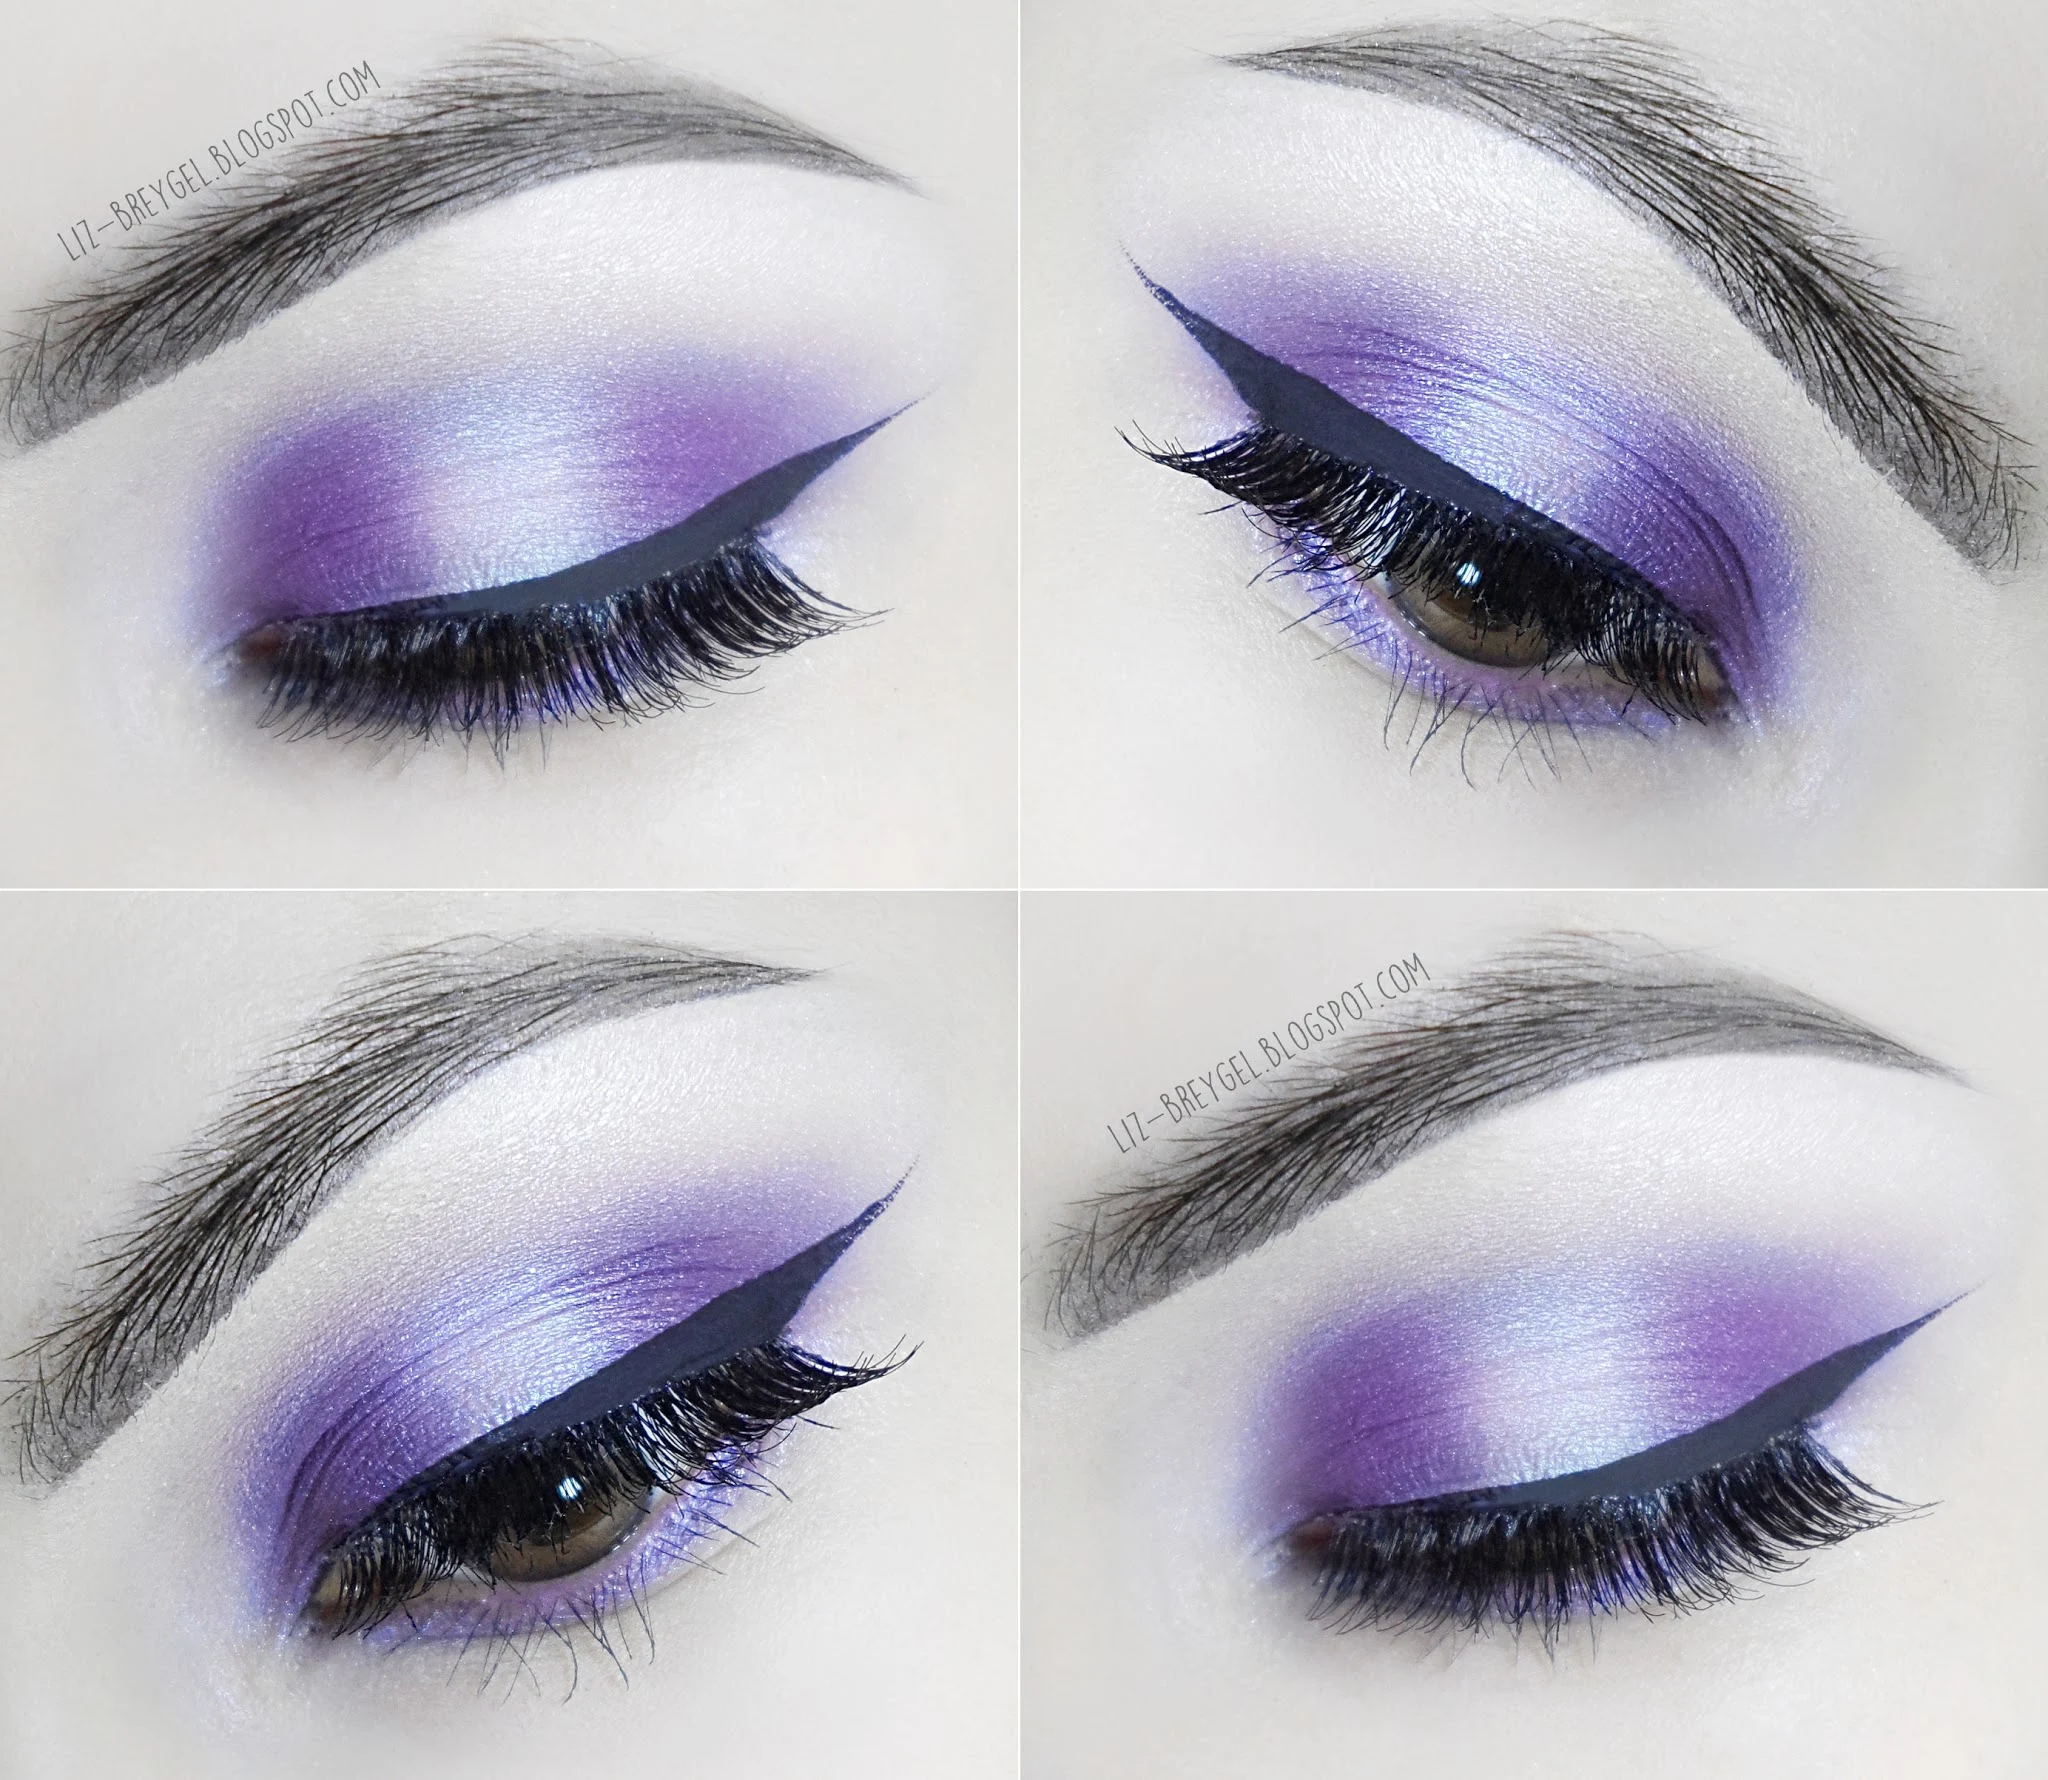 a close-up of an eye with a purple smokey eye makeup look inspired by amethyst